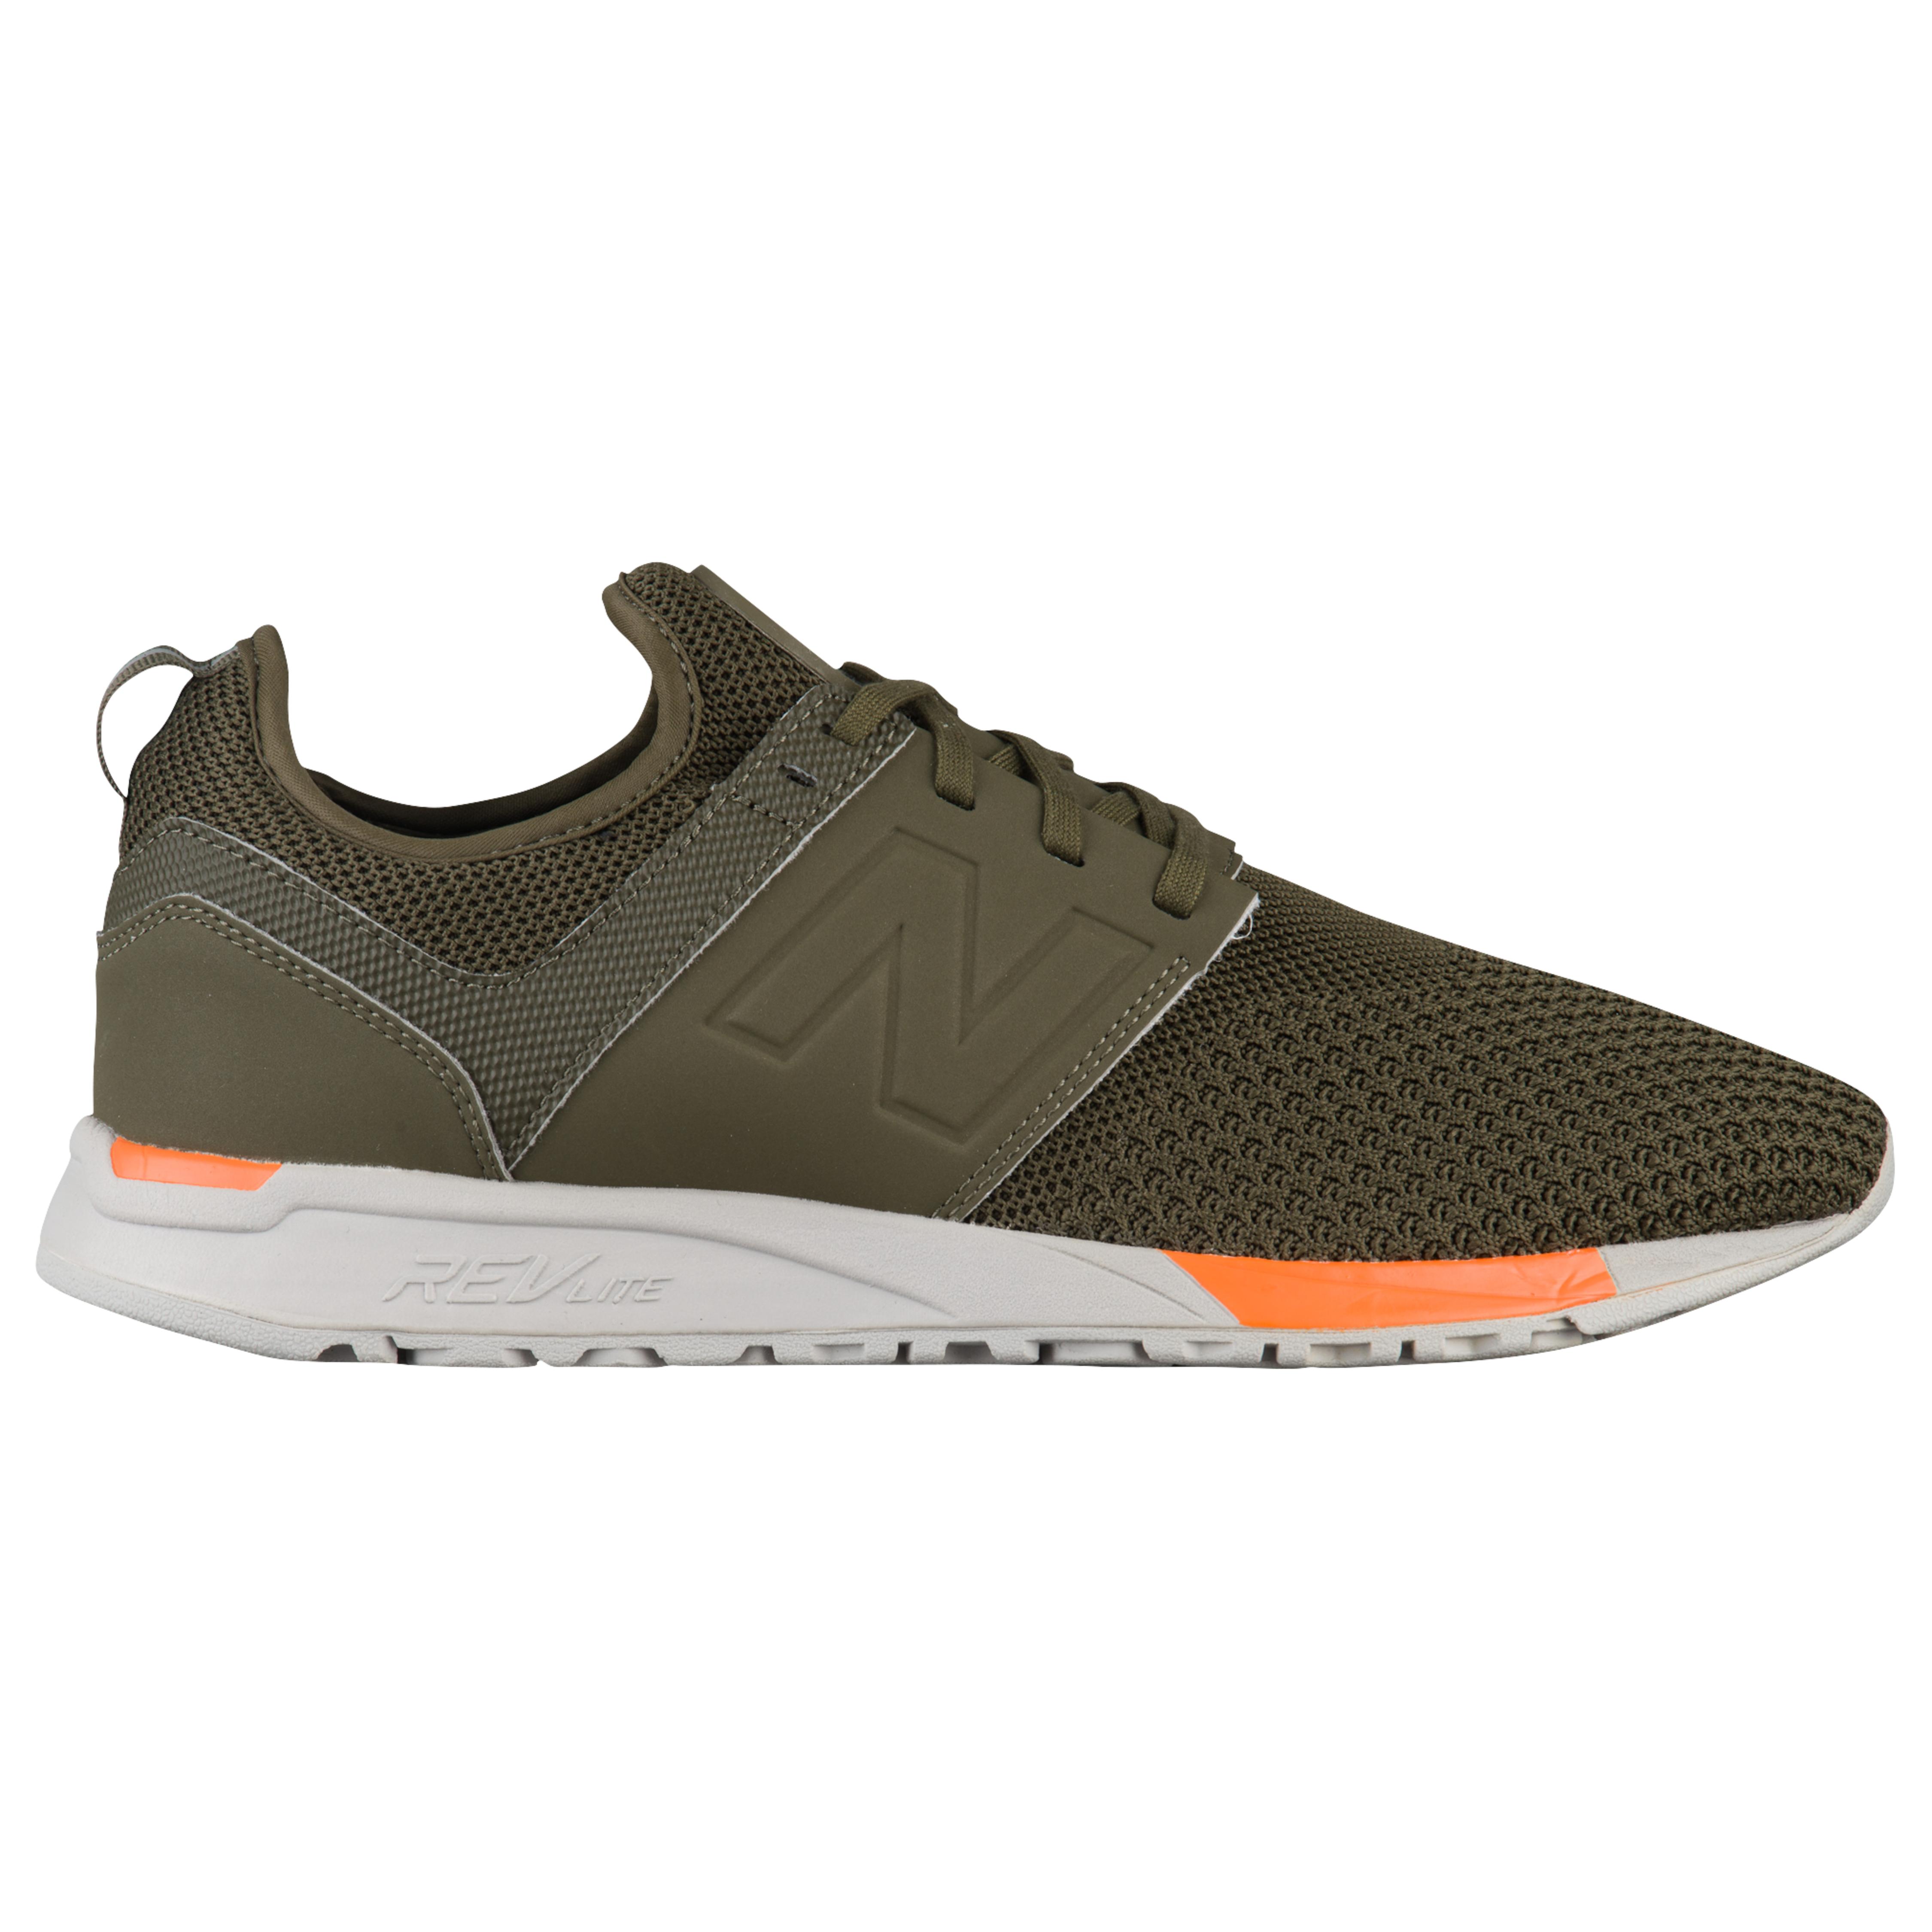 New Balance Synthetic 247 Knit in Olive/Green (Green) for Men - Lyst